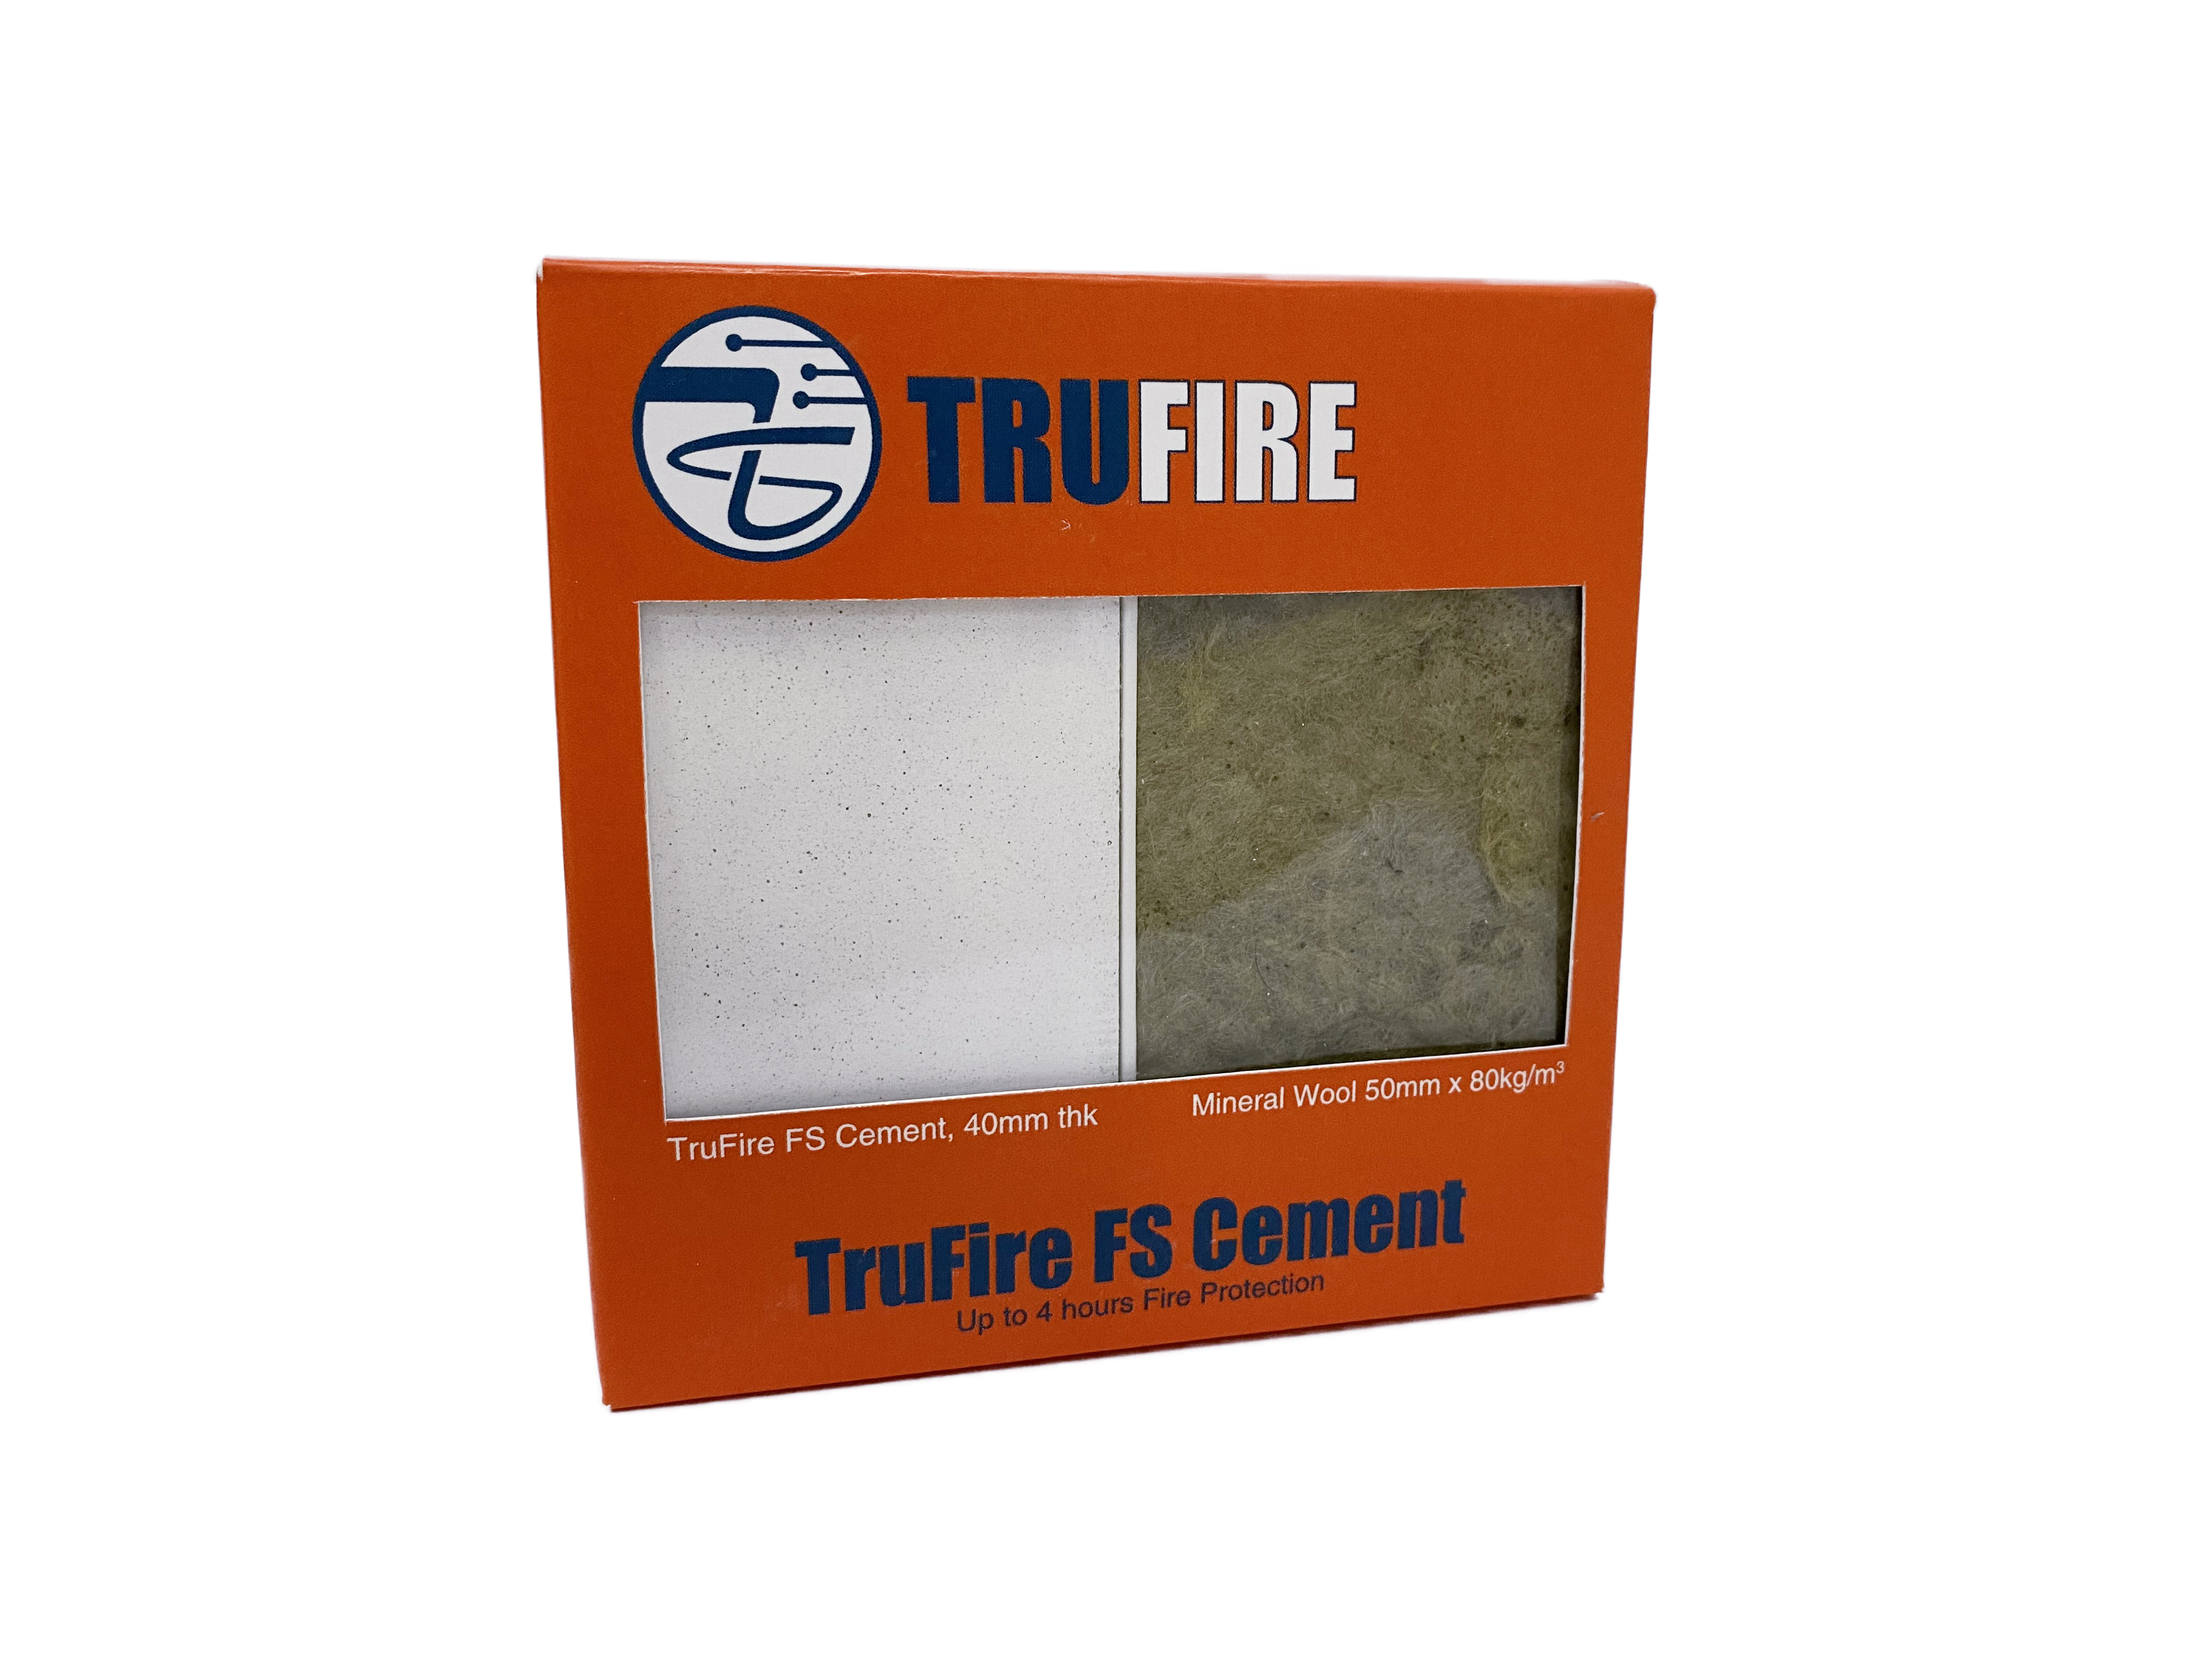 Fire Resistant Penetration Sealing System